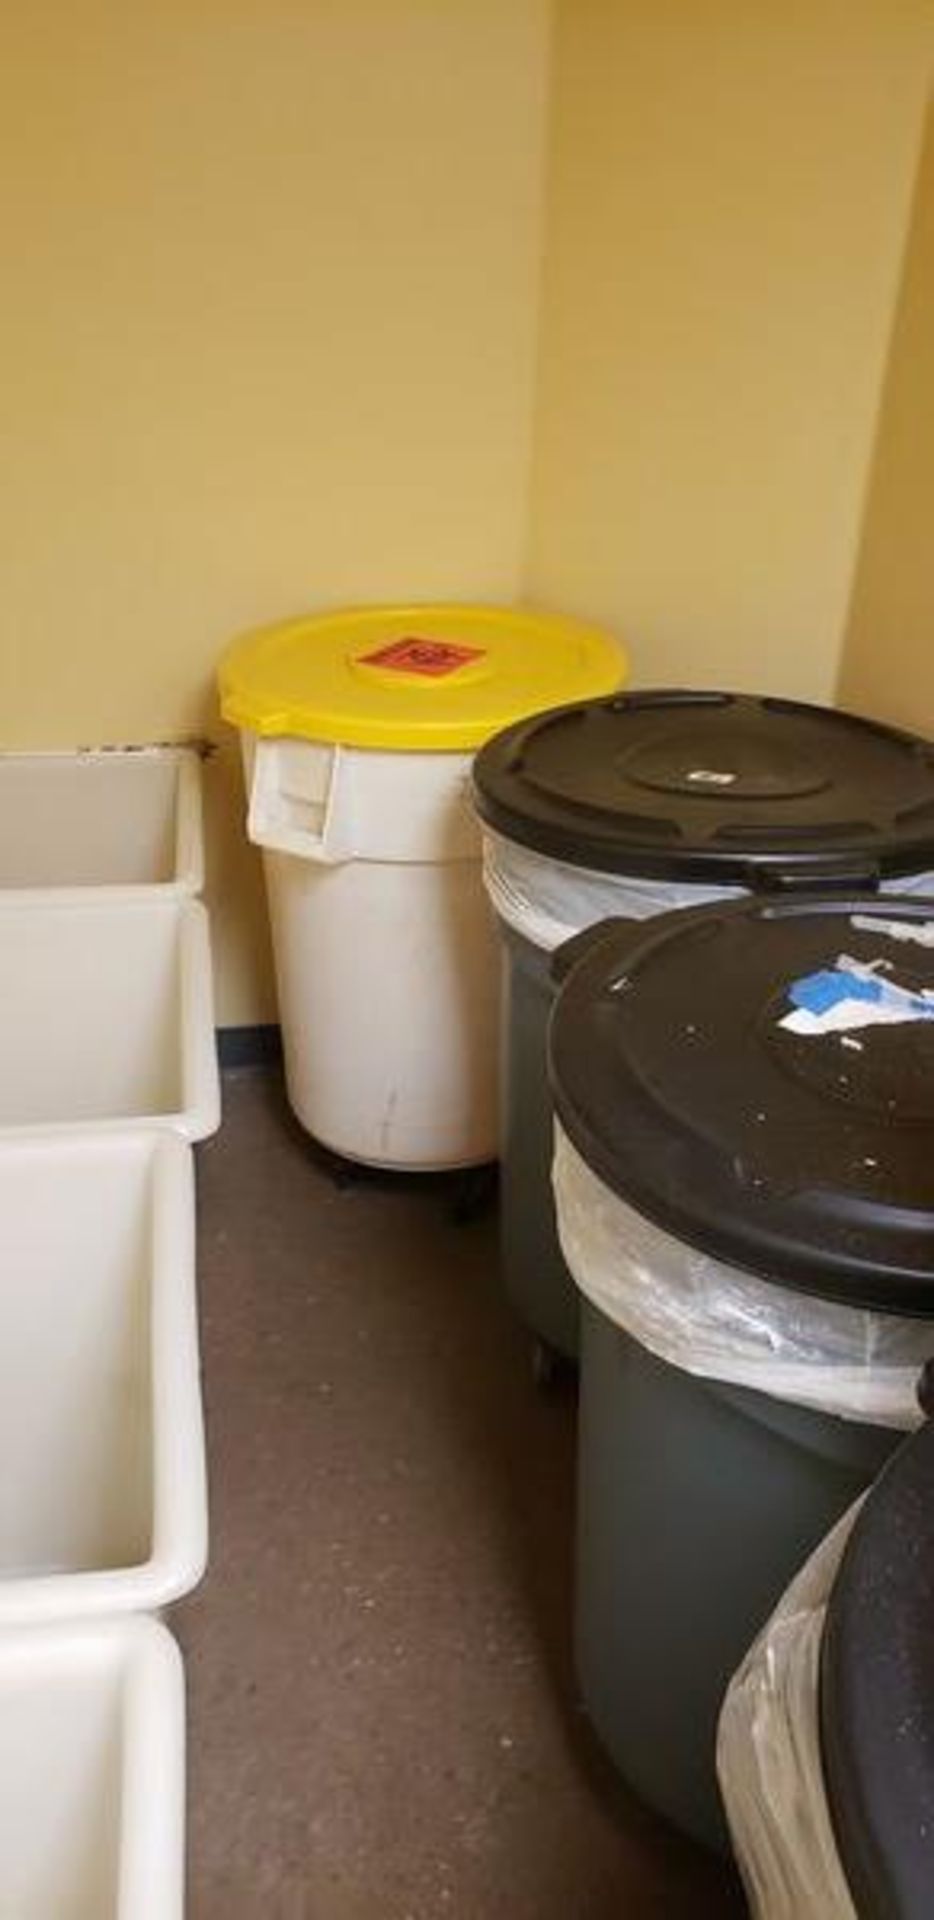 5 ROLLING TRASH CANS WITH BIOHAZARD BAGS - Image 4 of 4